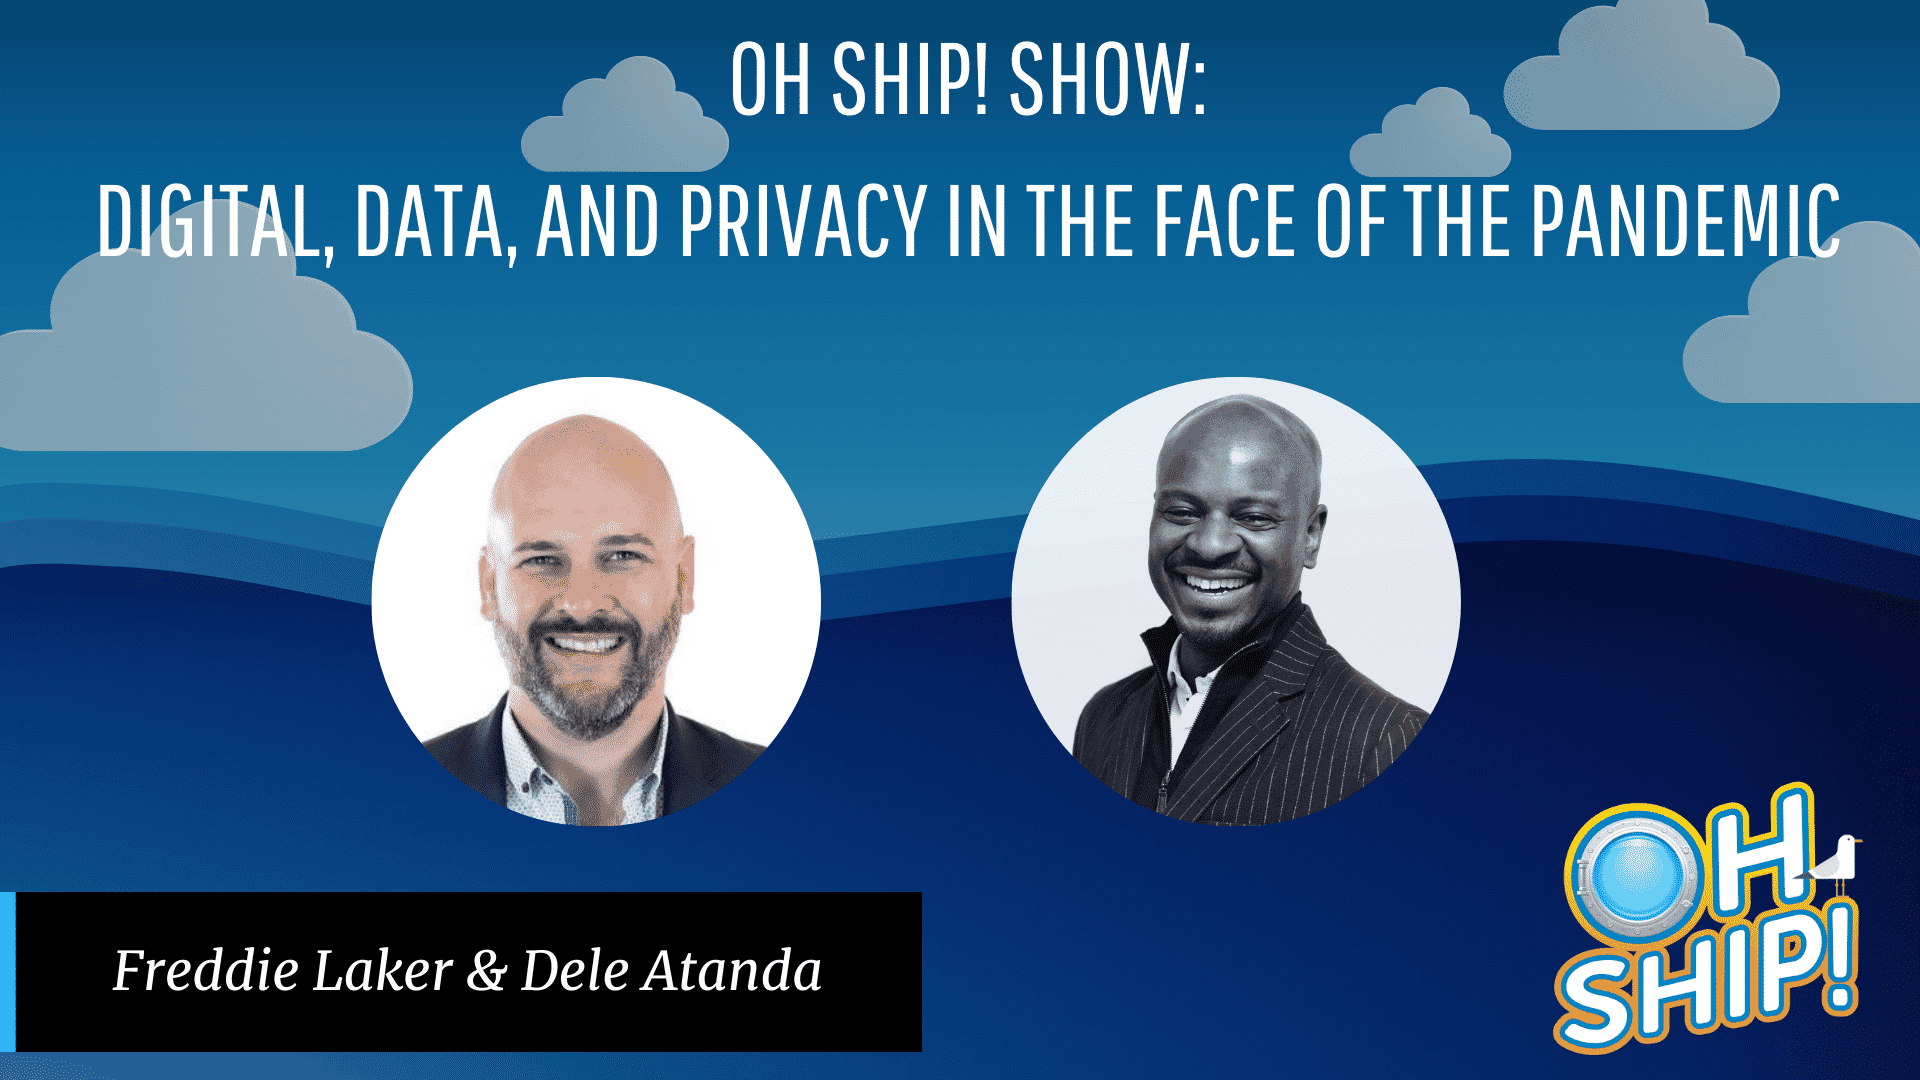 A promotional image for the "Oh Ship! Show" featuring the topic "Digital, Data, and Privacy in the Face of the Pandemic." It includes photos of two speakers, Freddie Laker and Dele Atanda, against a blue background with clouds and the show's logo.